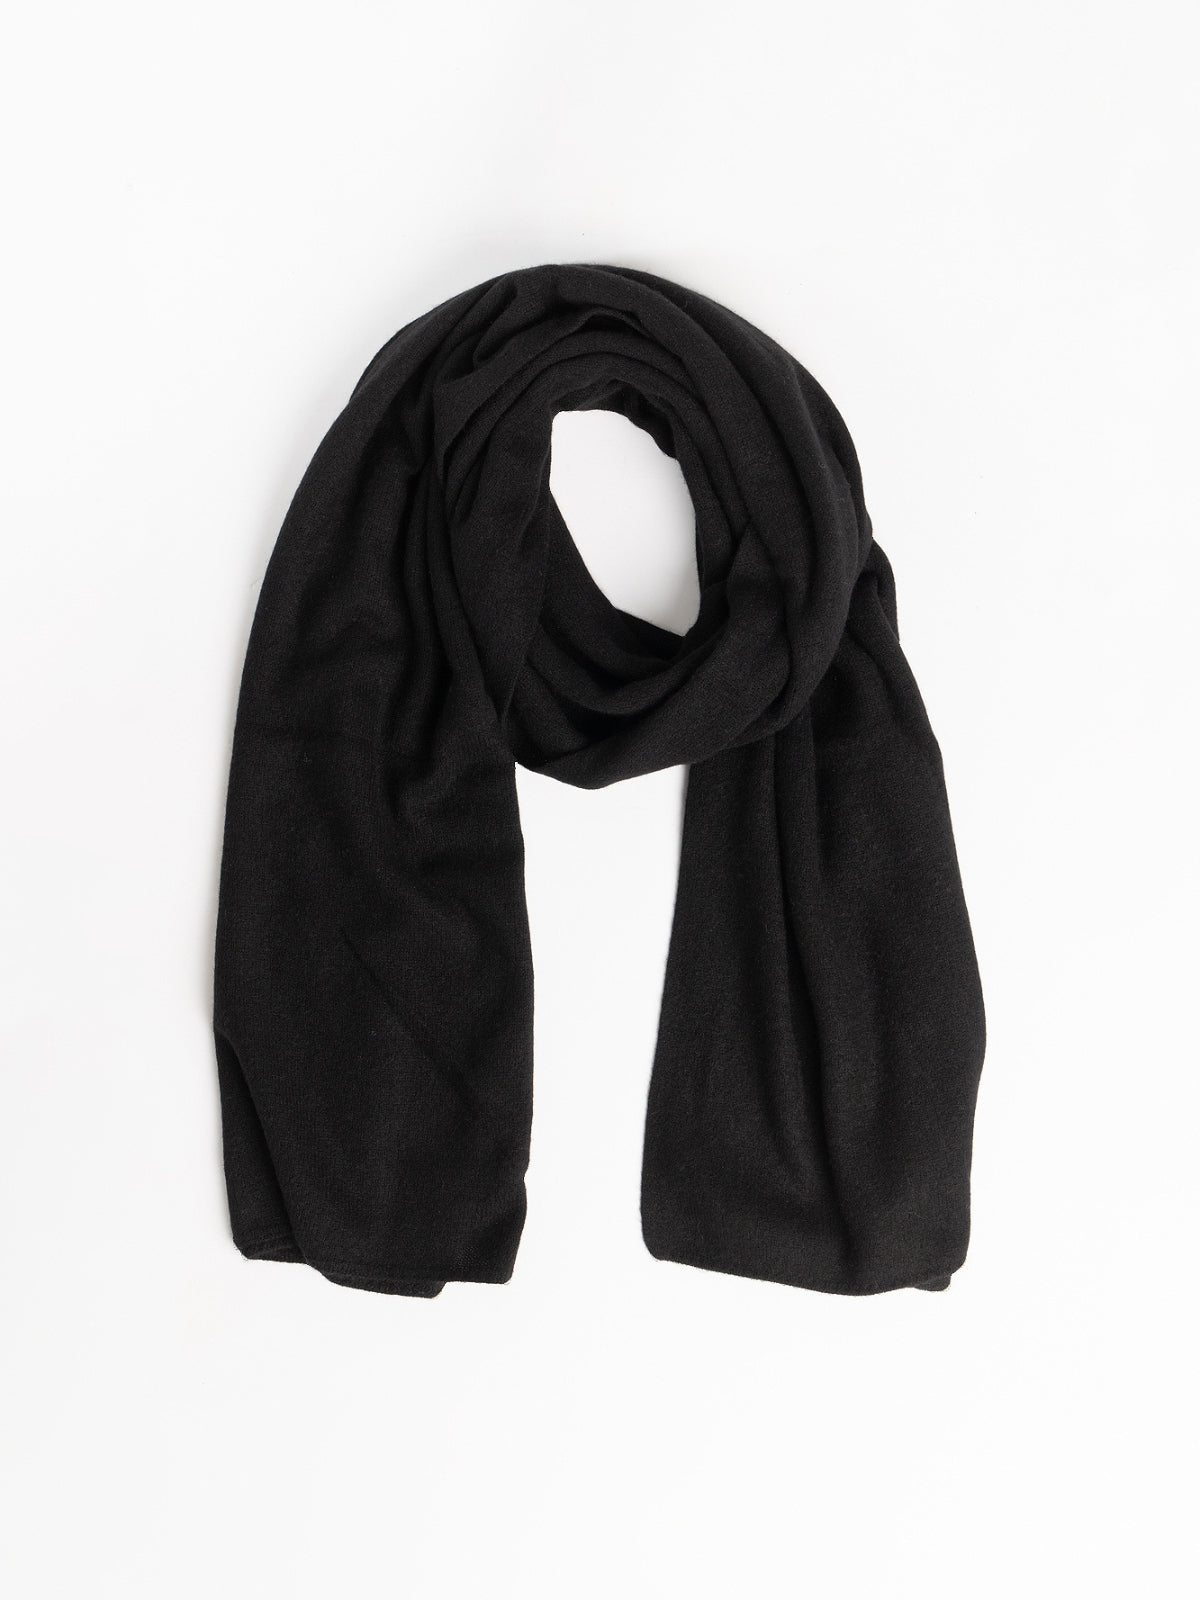 Two Blind Brothers - Gift Cashmere Travel Wrap Black